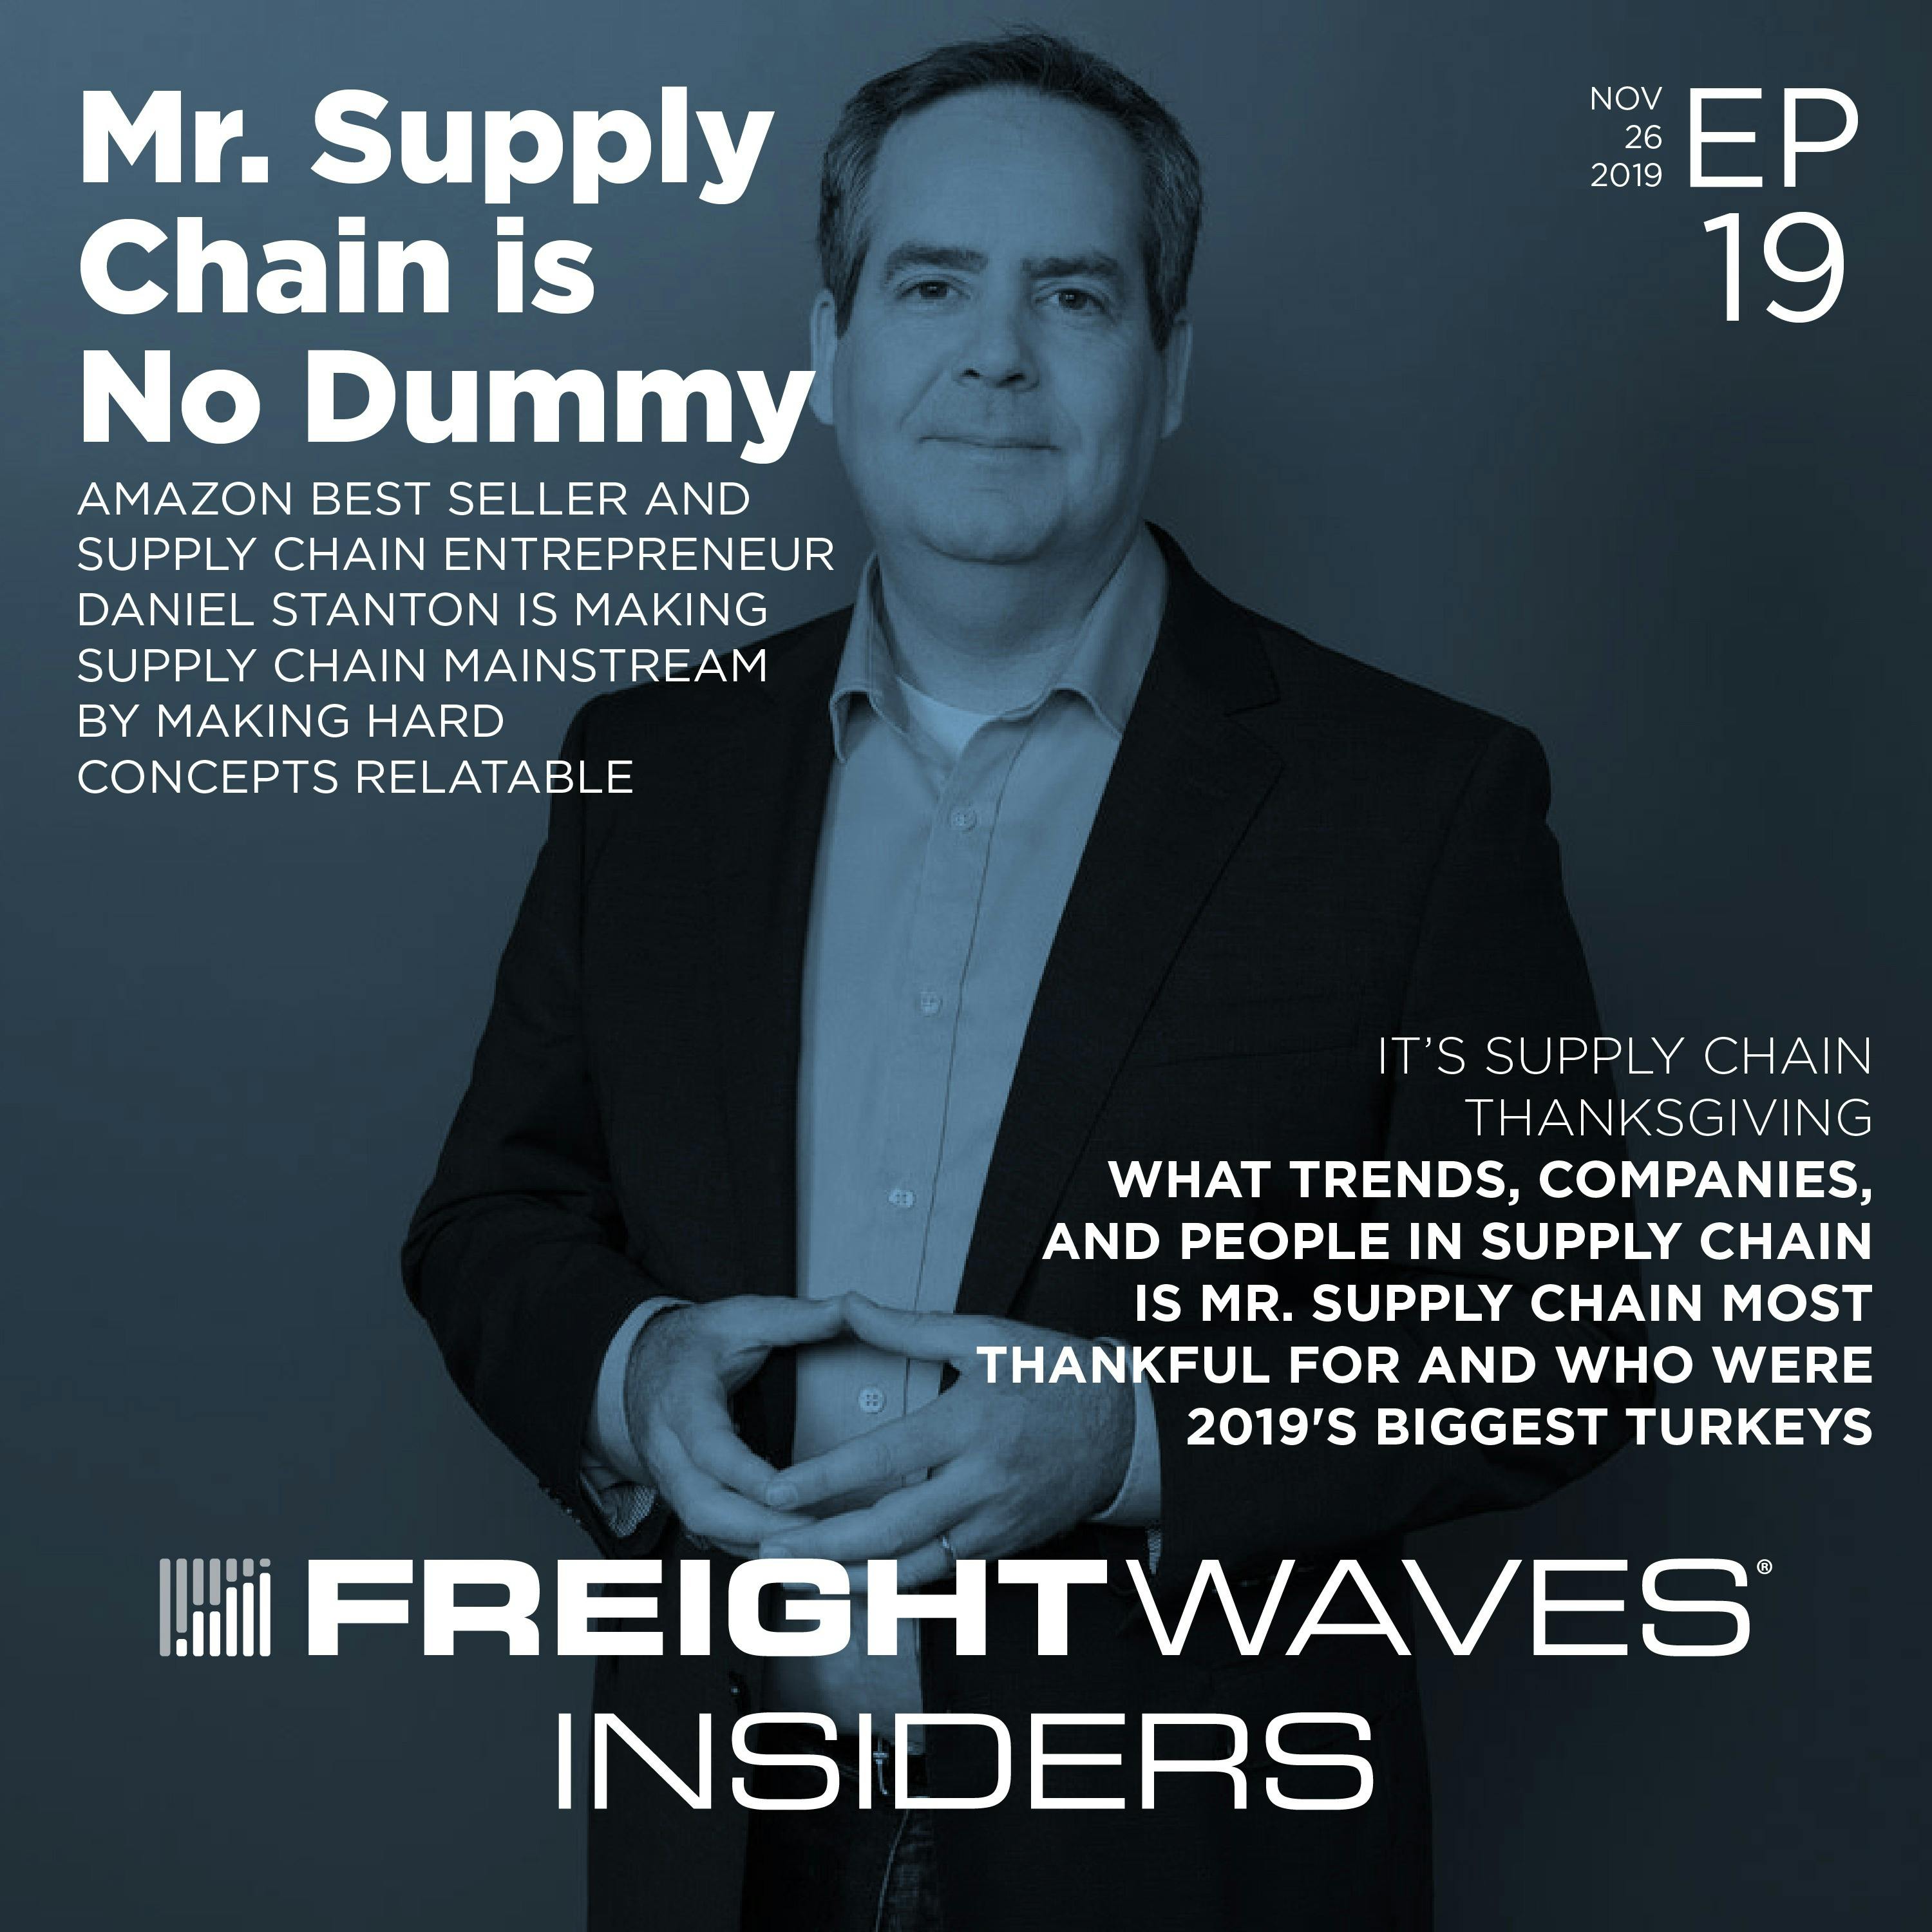 Trends and turkeys, what was Mr. Supply Chain thankful for in 2019